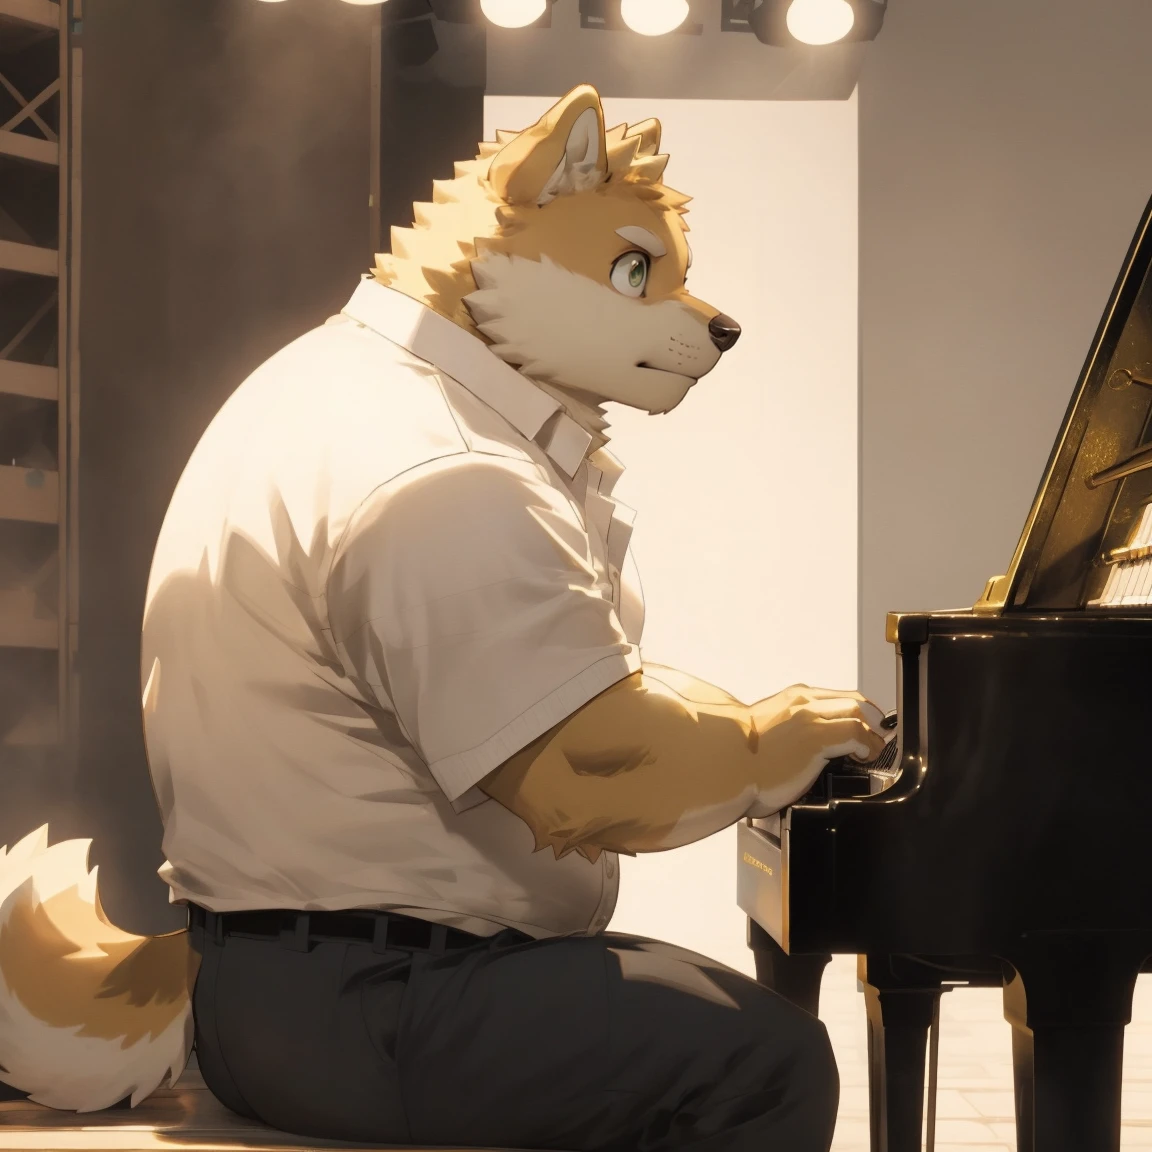 masterpiece, best quality, 8k resolution, Very detailed, hairy，shiba inu，(Black hair)，(((Golden fur)))，(((Golden Eyes)))，Chubby，Chubby face，(((White shirt)))，(((Loose shirt)))，((Black pants))，Highest quality scene，(((Solitary)))，(((solitary)))，((Playing the piano))，((light))，(((piano)))，(((earnest)))，(((Round face)))，(((whole body)))，(((Medium shot)))，(((stage)))，(((on the side of)))，((Sitting on the piano stool))